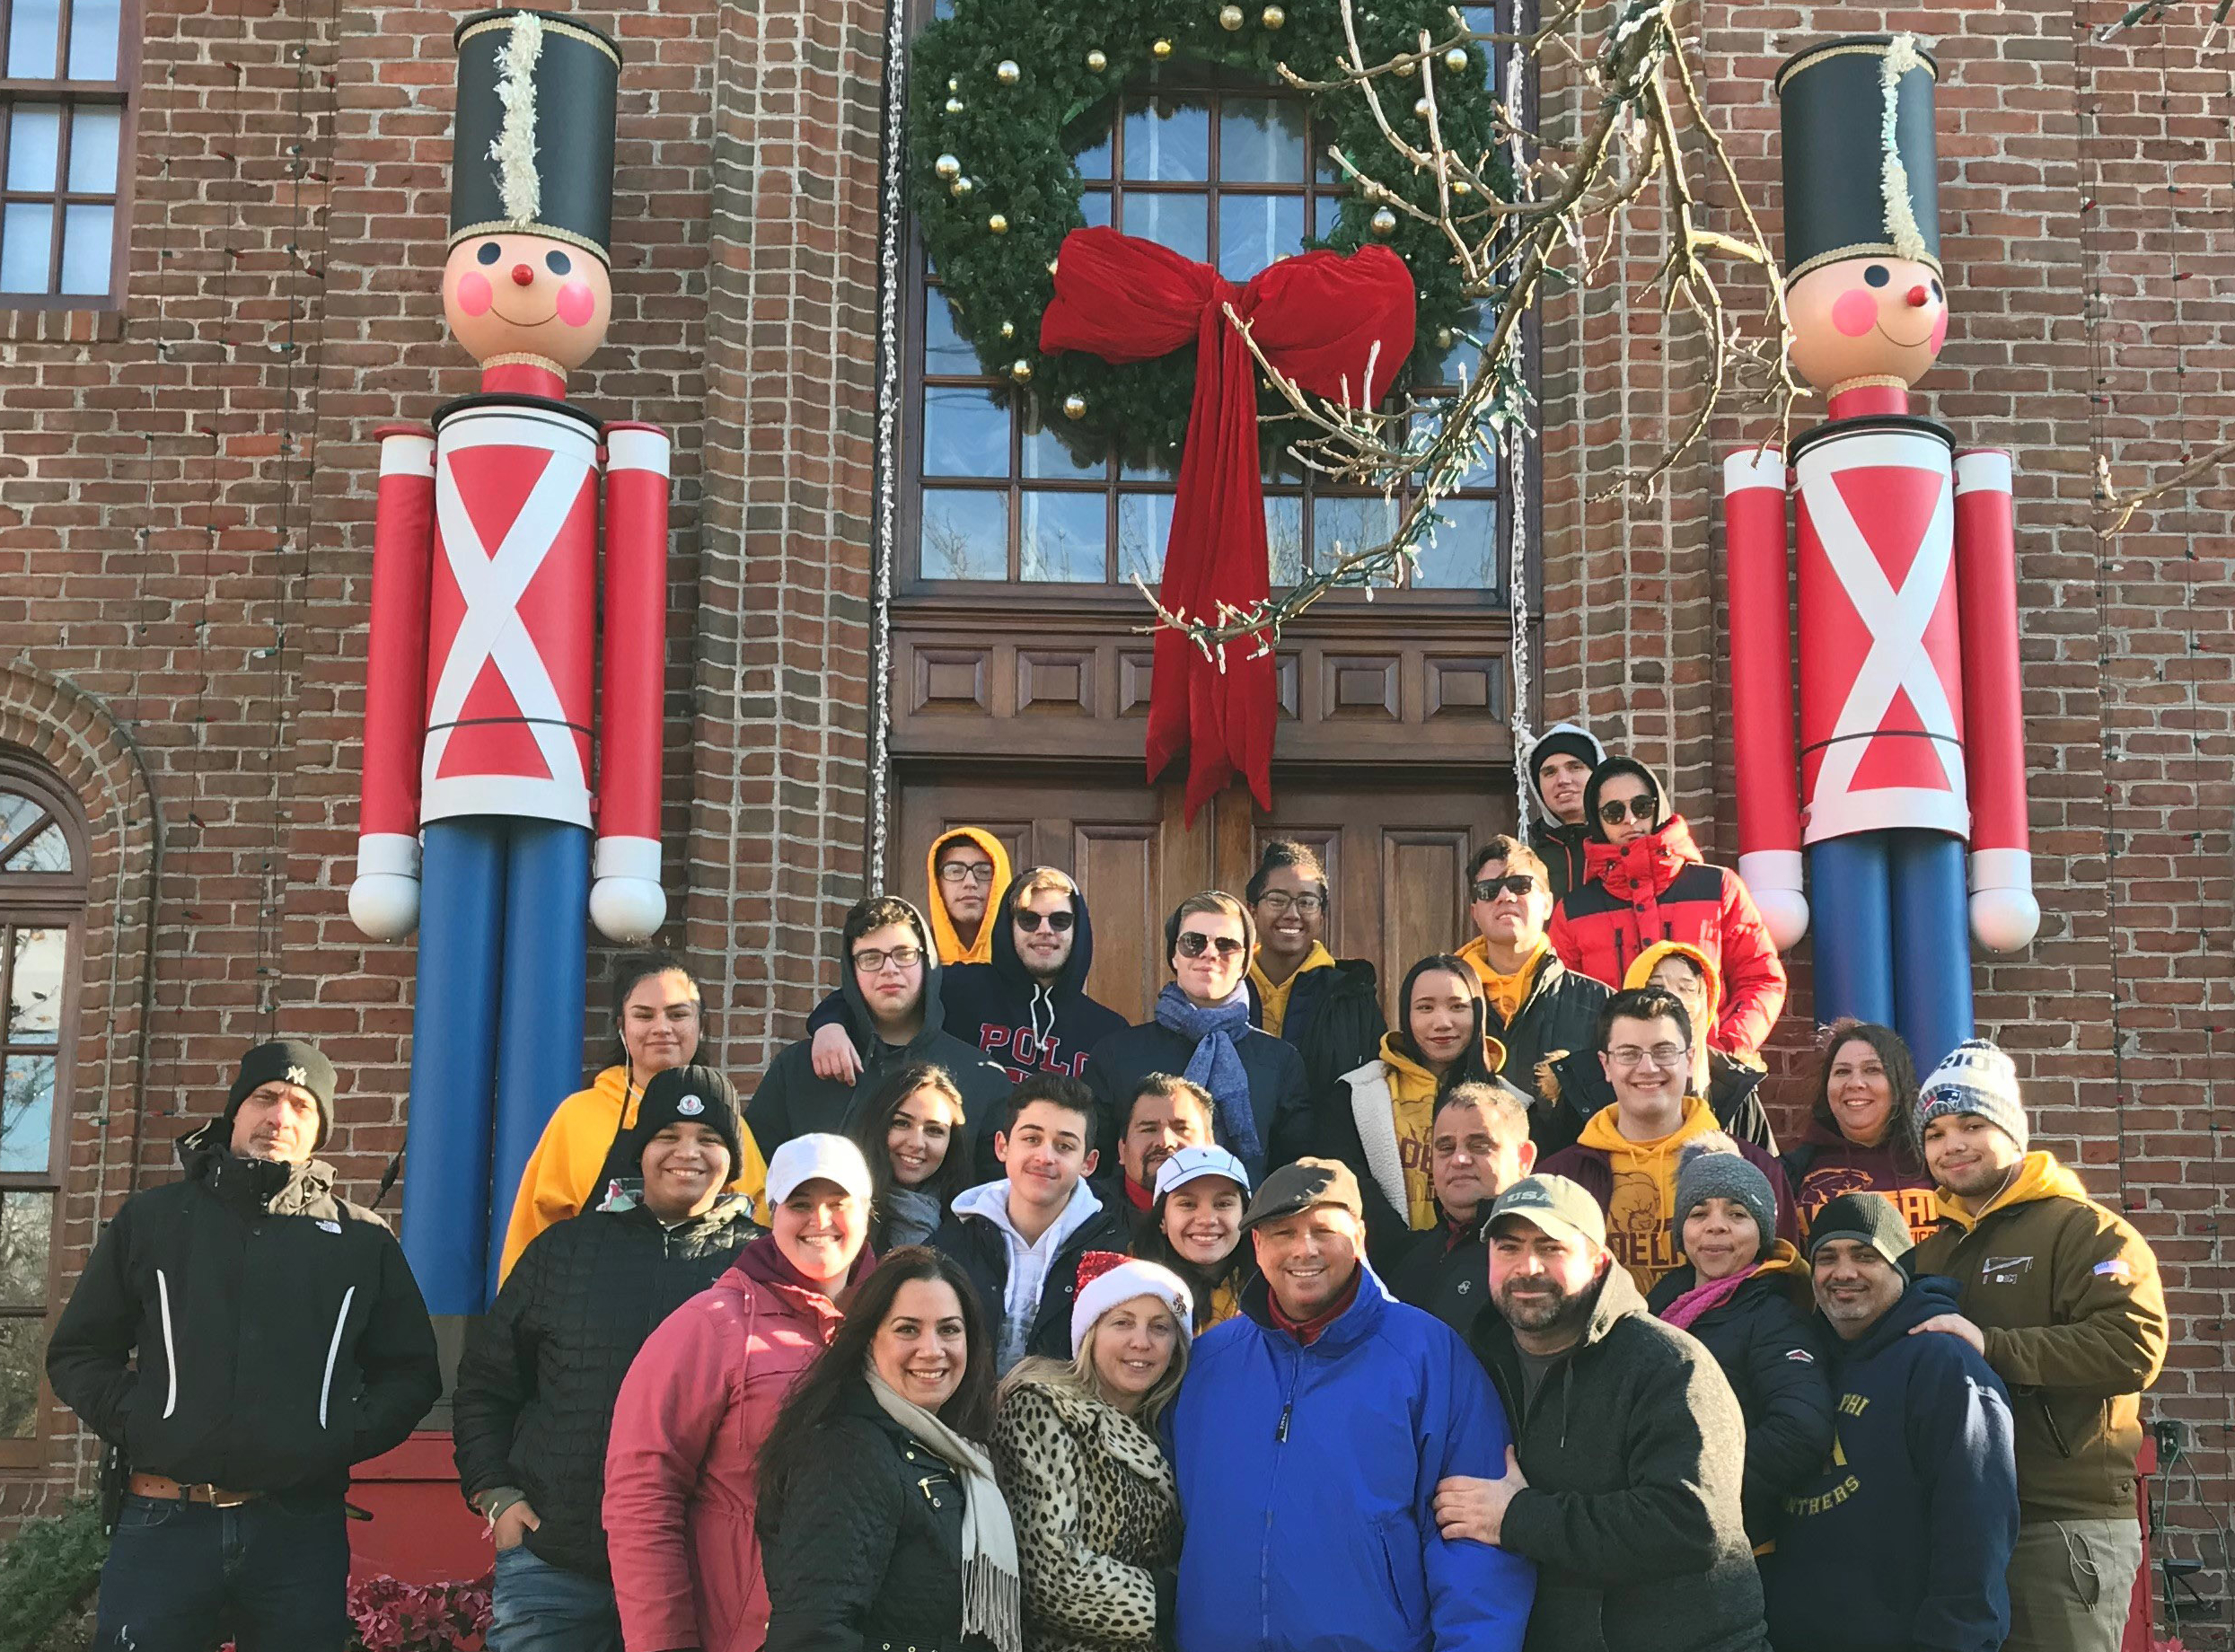 Adelphians join Mr. Joseph Mure Jr. and family in front of their home, the site of the 2018 Little North Pole event!